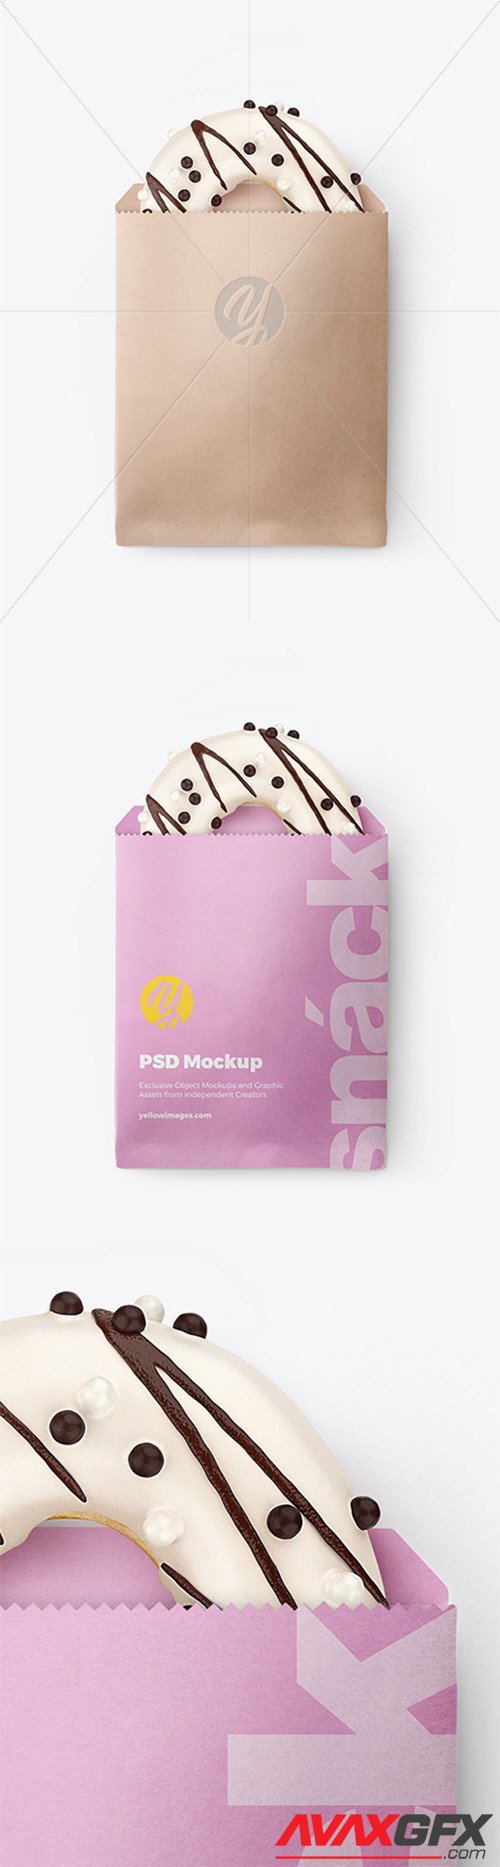 Download 18 Cement Paper Bag Front View Potoshop Yellowimages Mockups